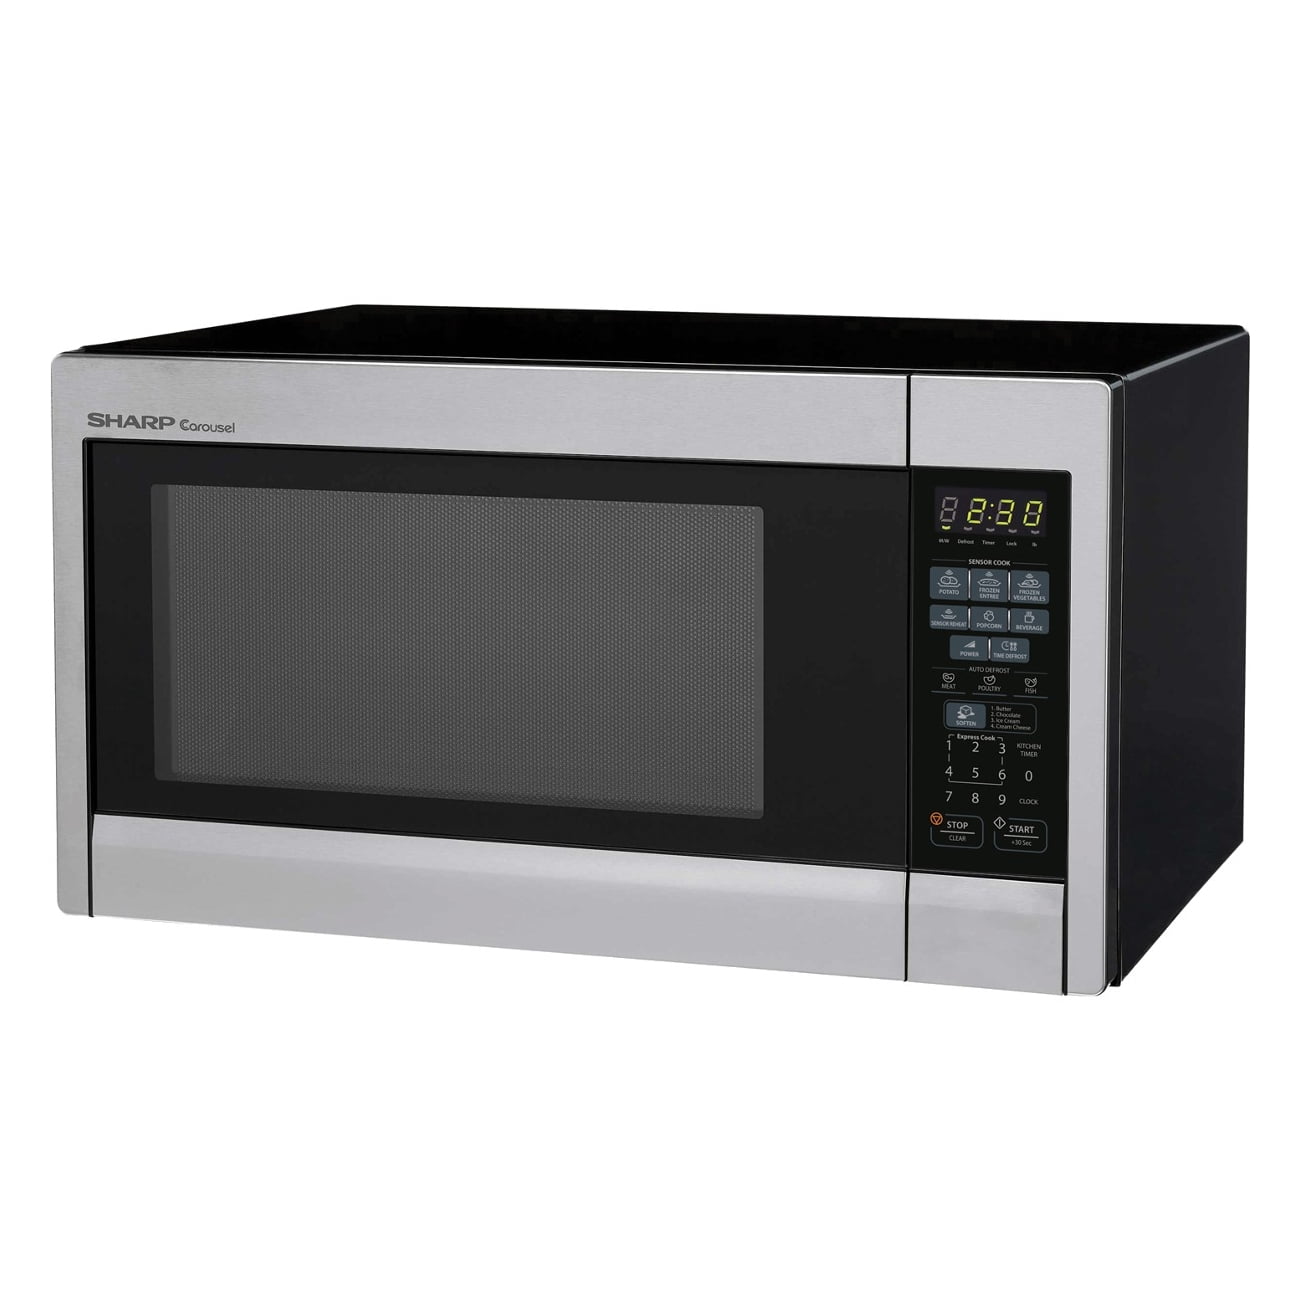 Sharp R451zs Carousel Countertop Microwave Oven 1 3 Cu Ft 1000w